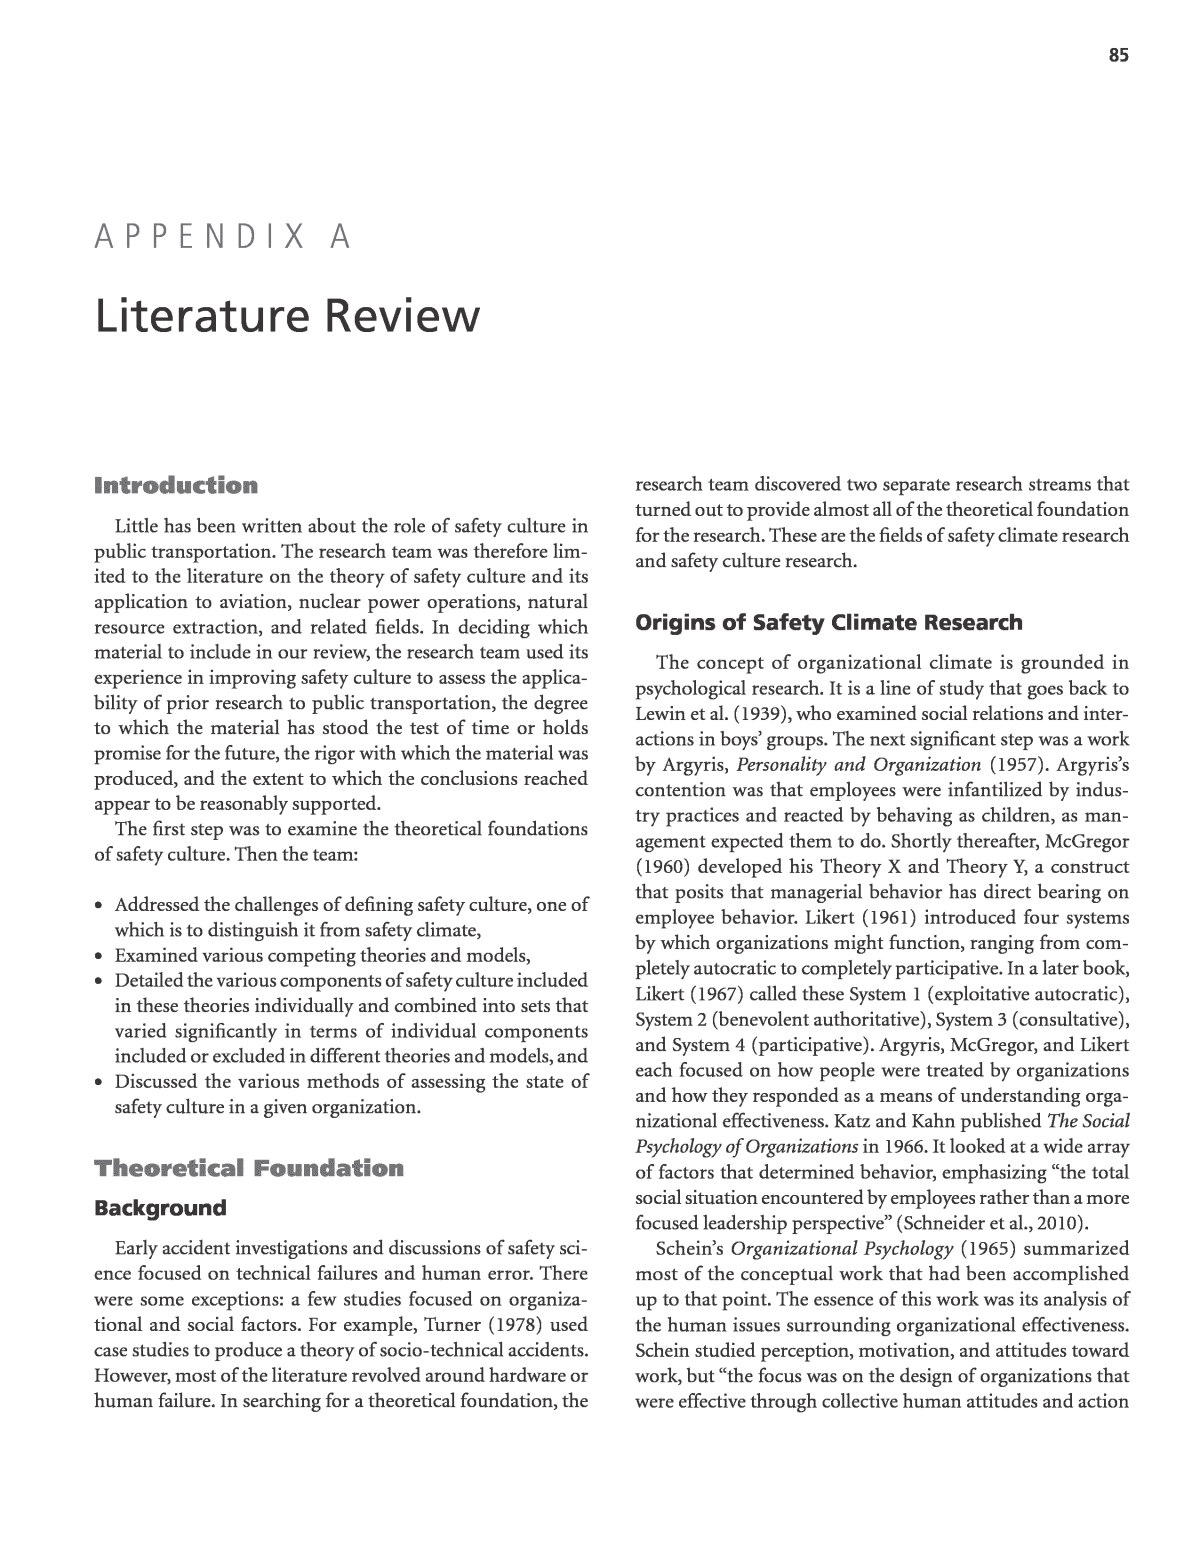 Literature review on organisational climate